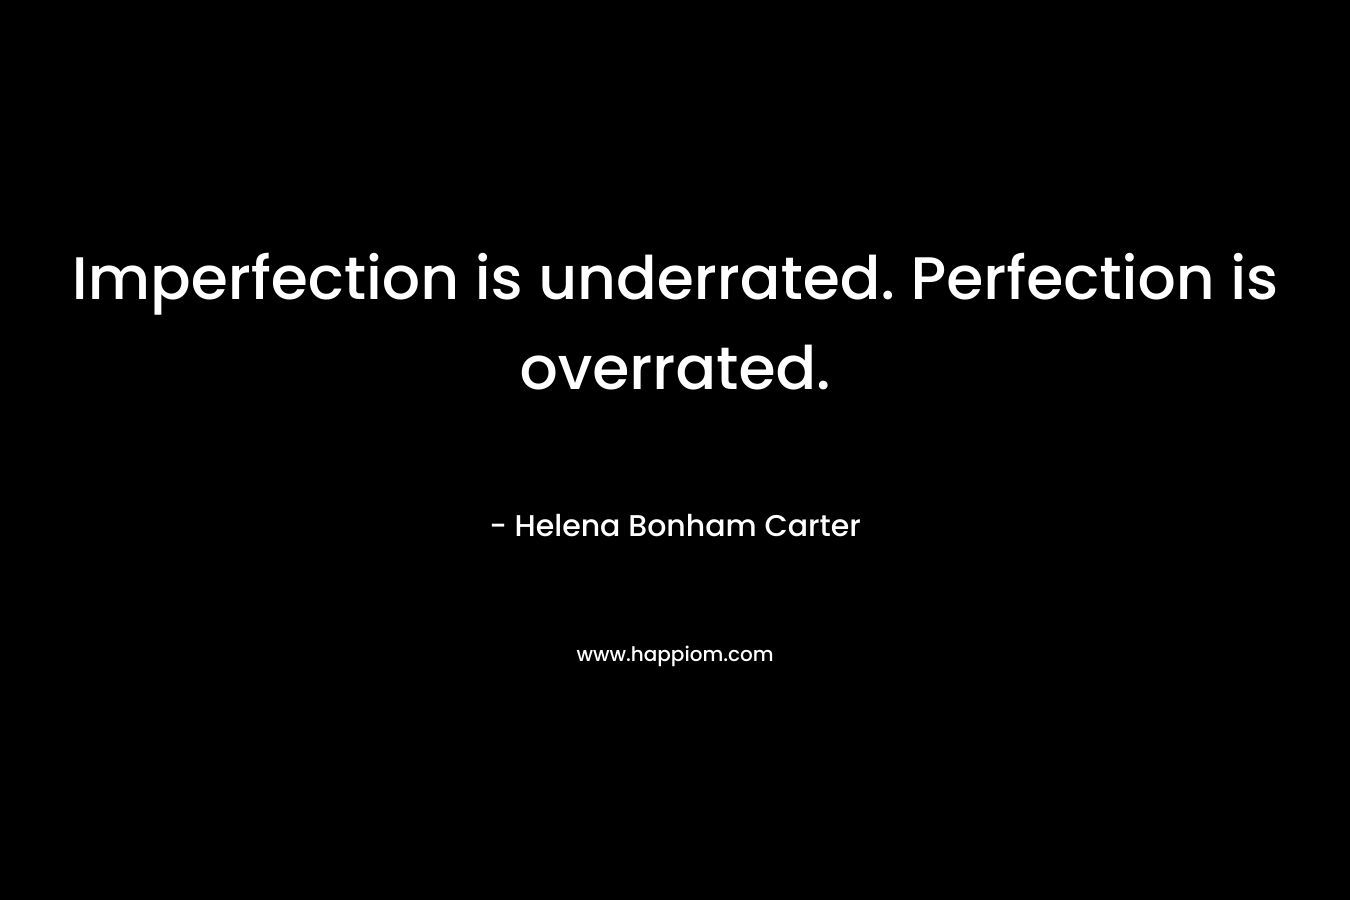 Imperfection is underrated. Perfection is overrated. – Helena Bonham Carter